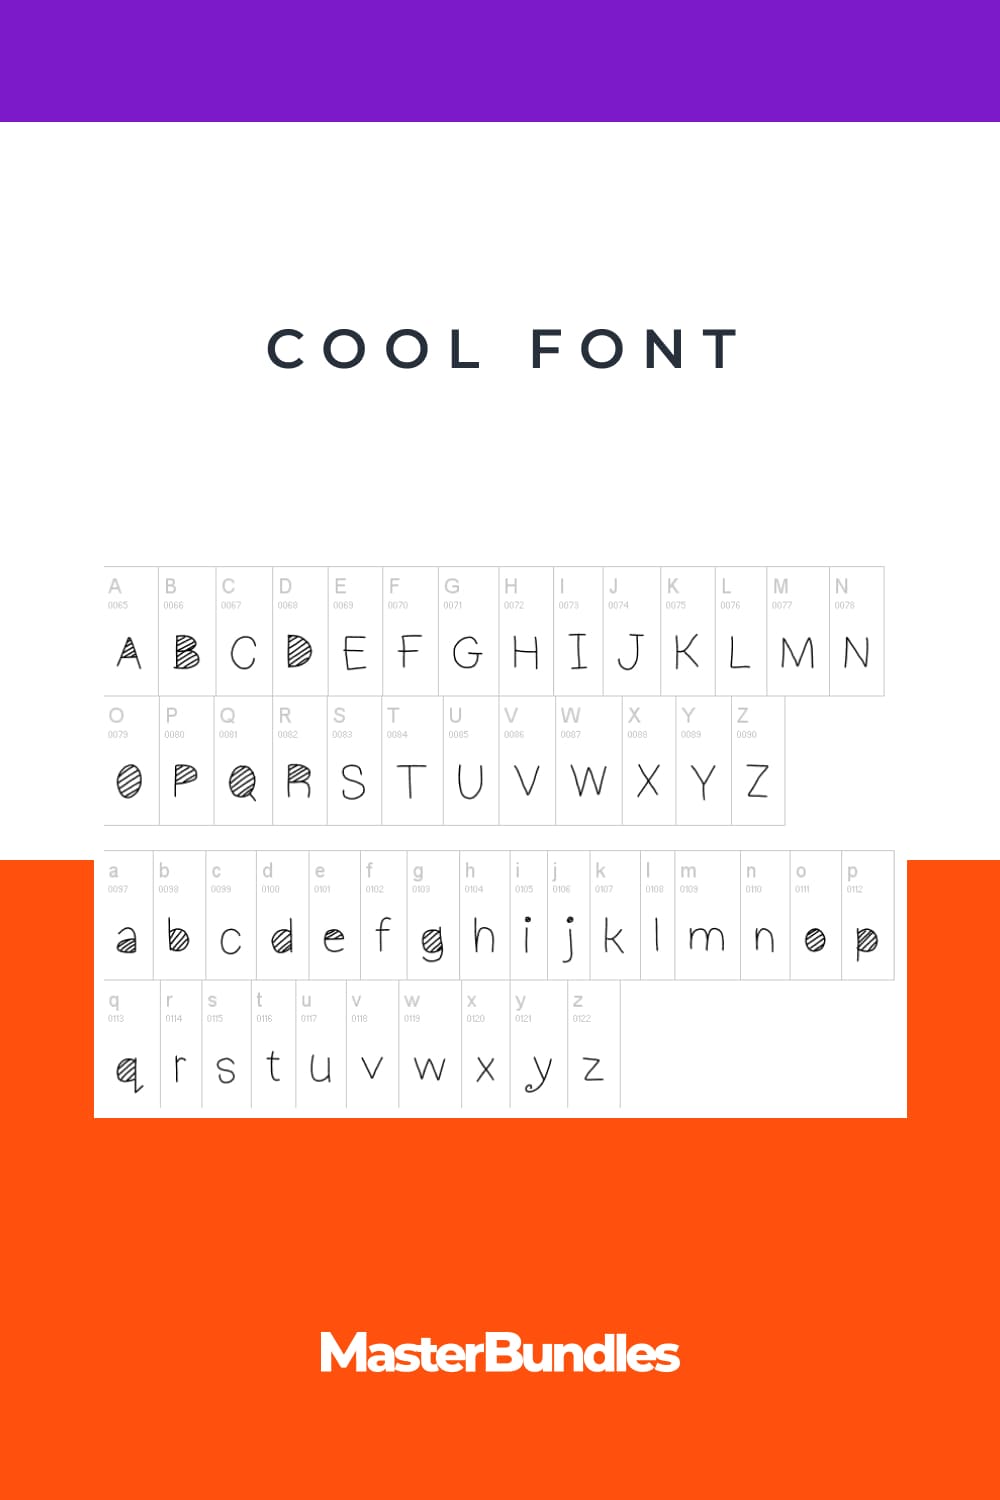 A common and versatile font.